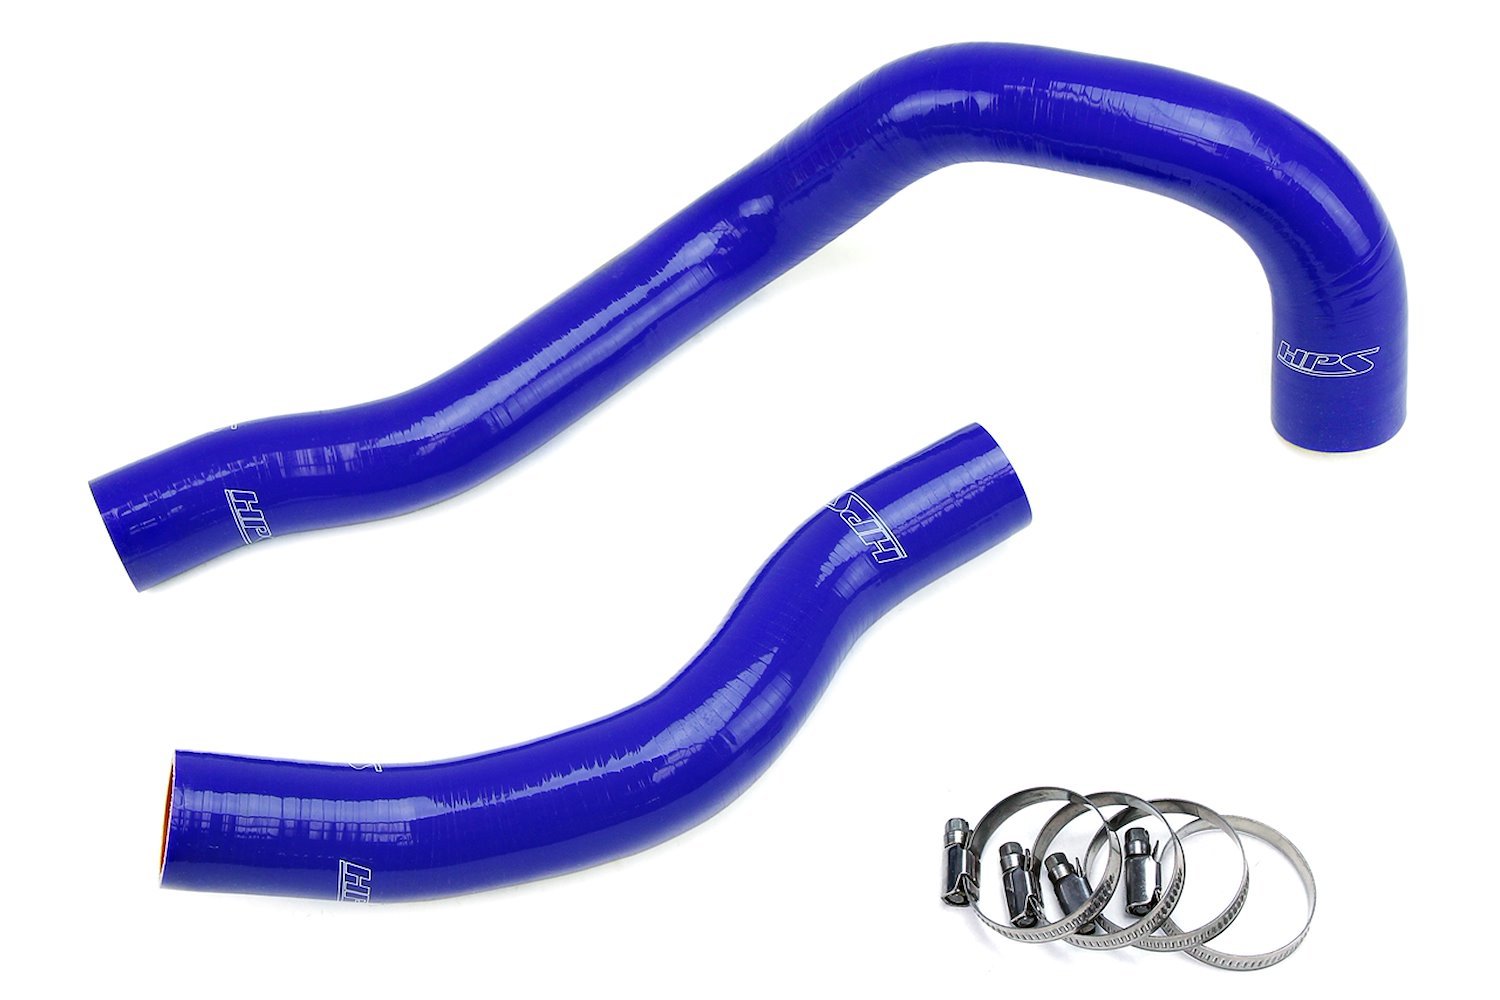 57-1225-BLUE Radiator Hose Kit, High-Temp 3-Ply Reinforced Silicone, Replace OEM Rubber Radiator Coolant Hoses